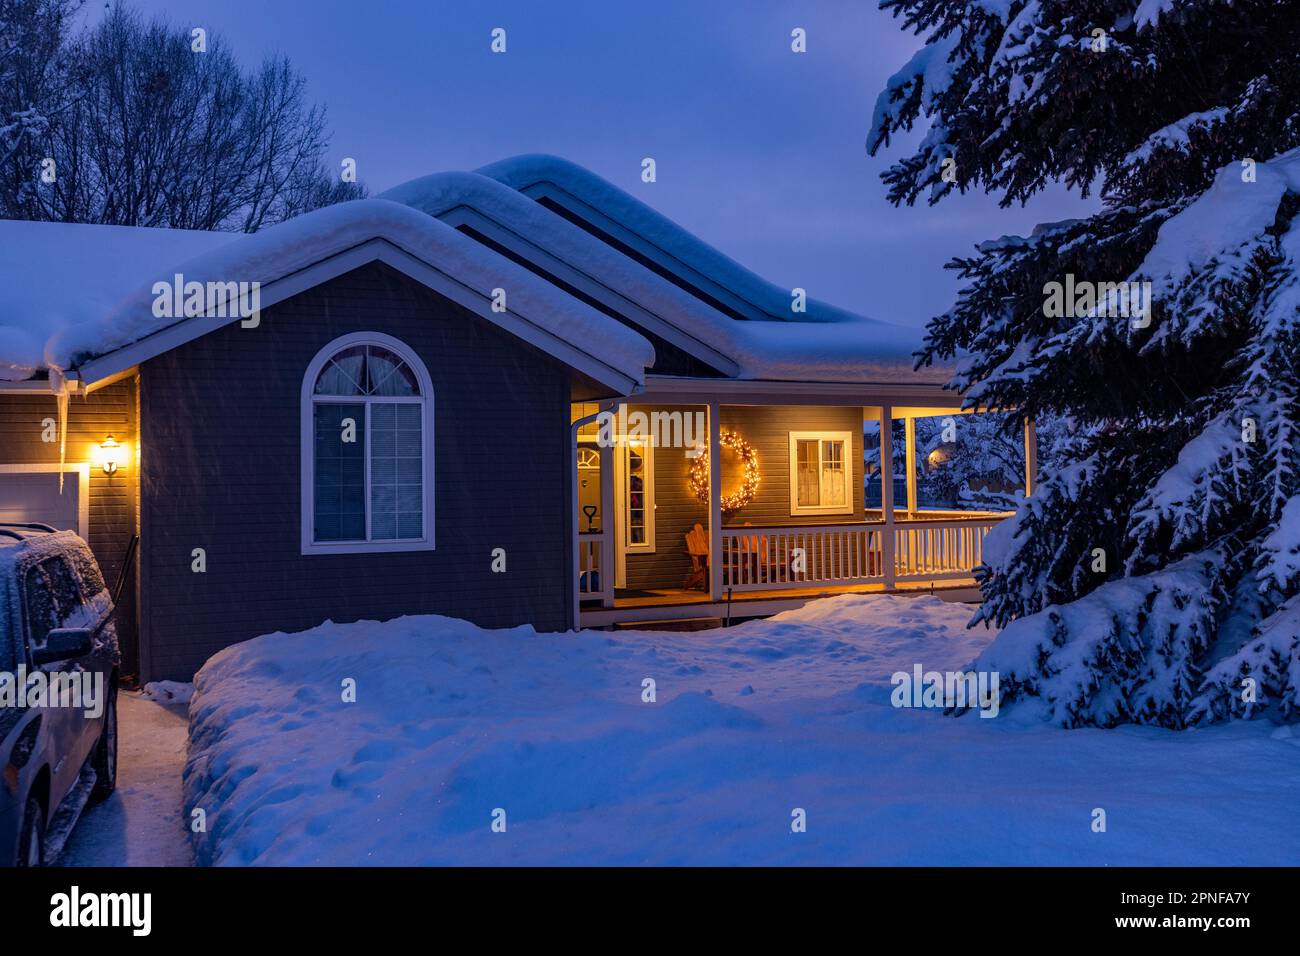 United States, Idaho, Bellevue, Snow covered house with porch lights Stock Photo